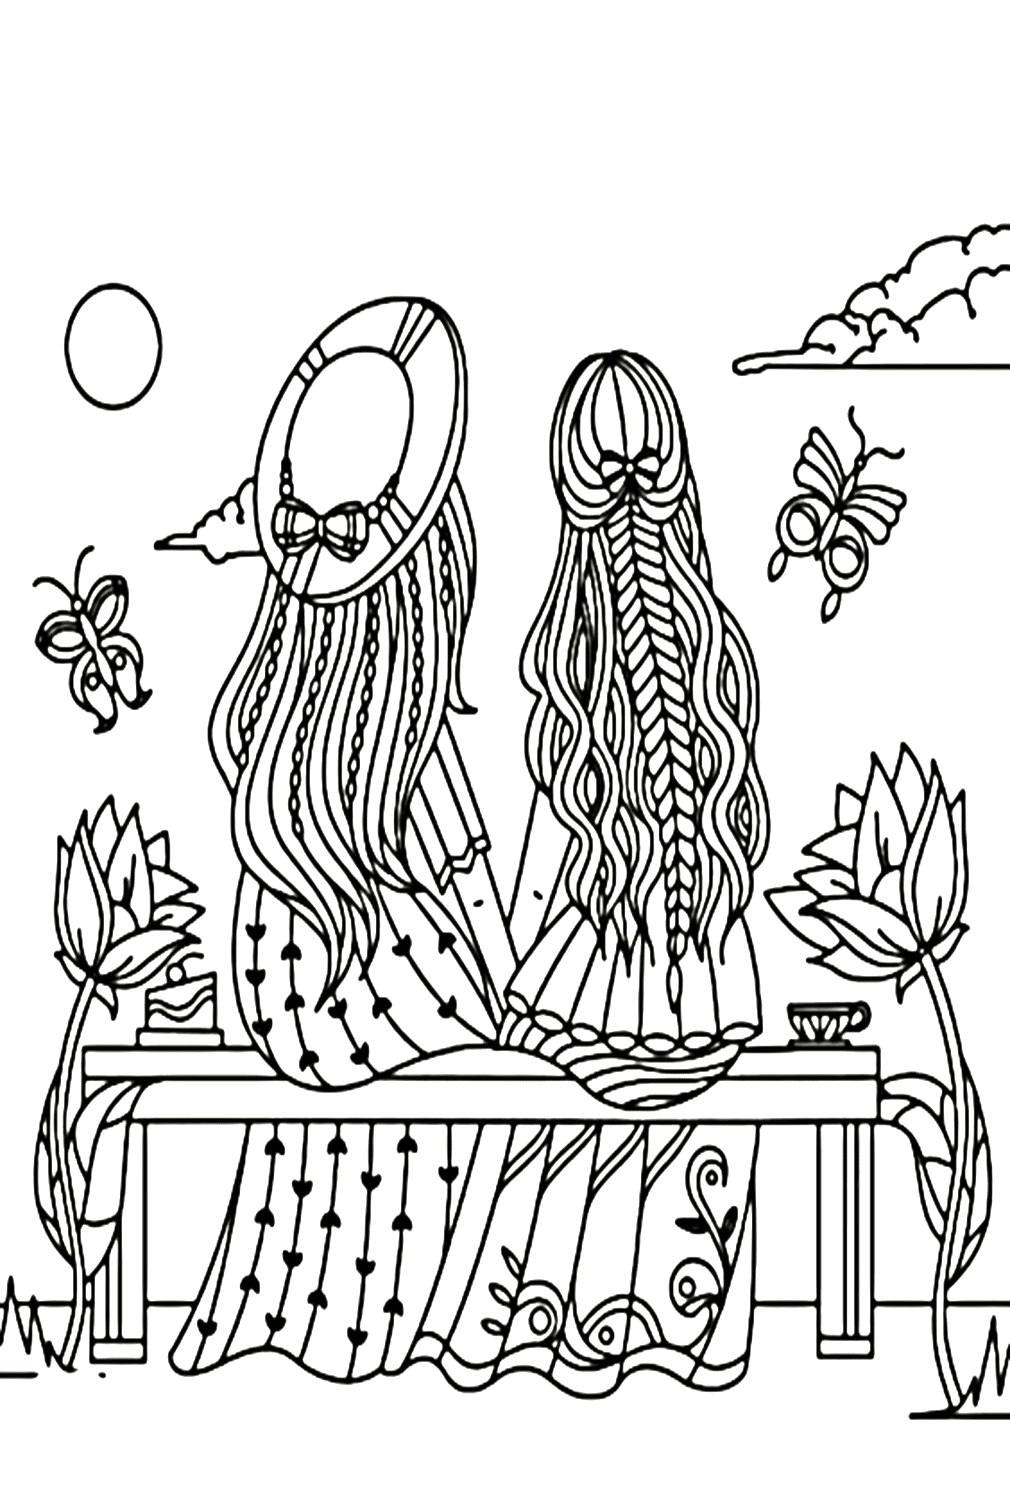 Sisters Day Coloring Sheet For Adults